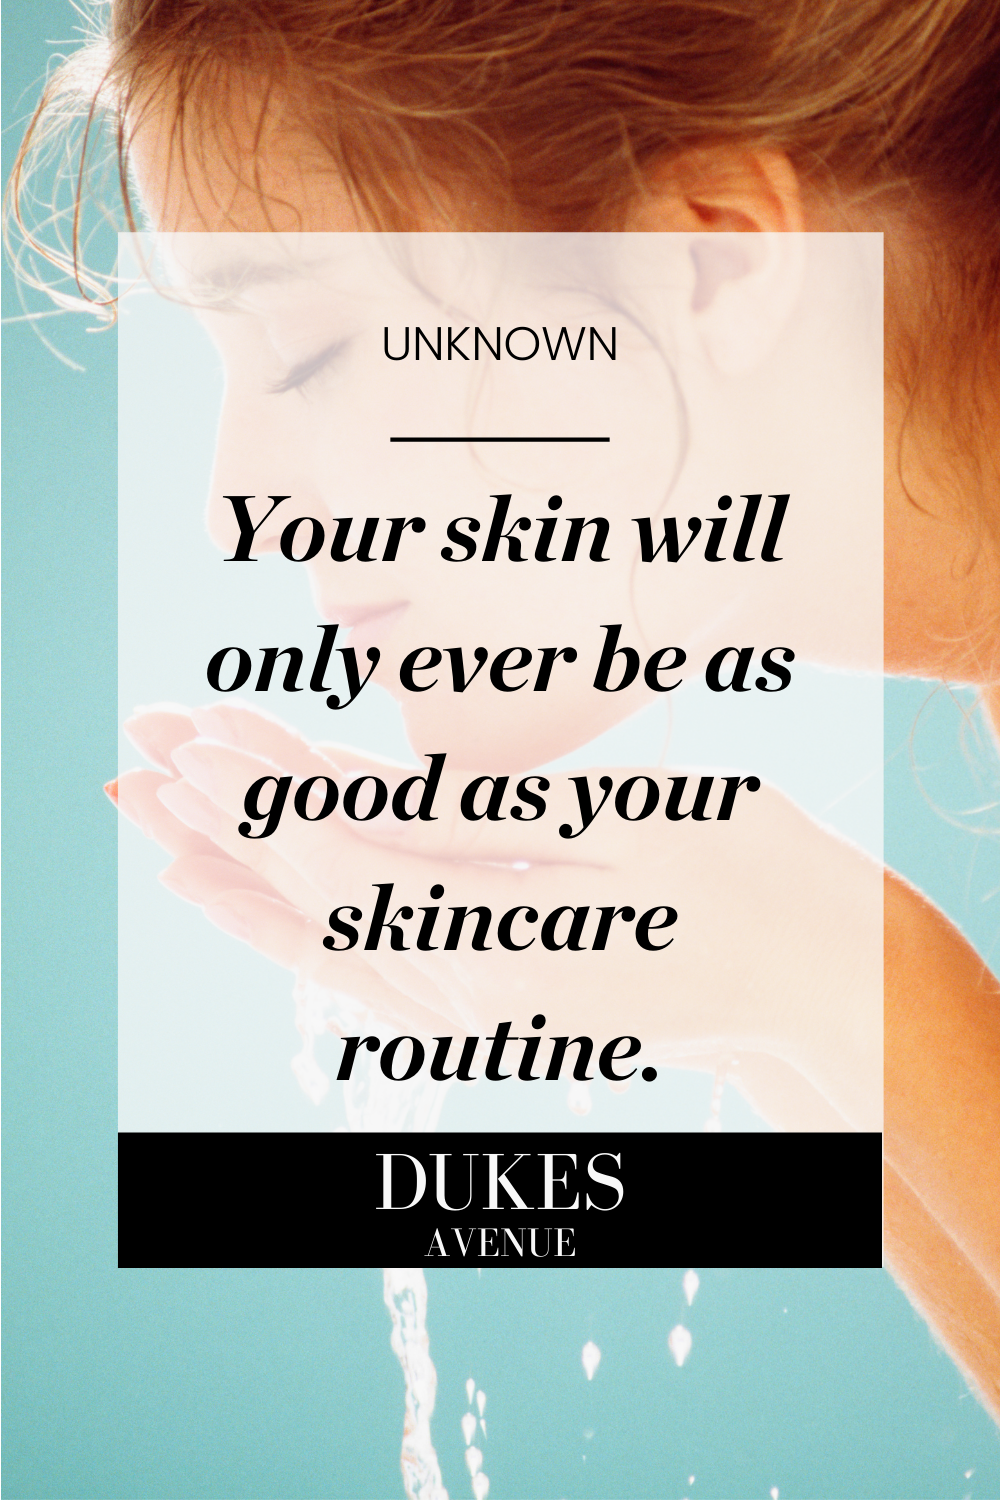 70+ Beauty and Skin Care Quotes Every Woman Needs to Hear